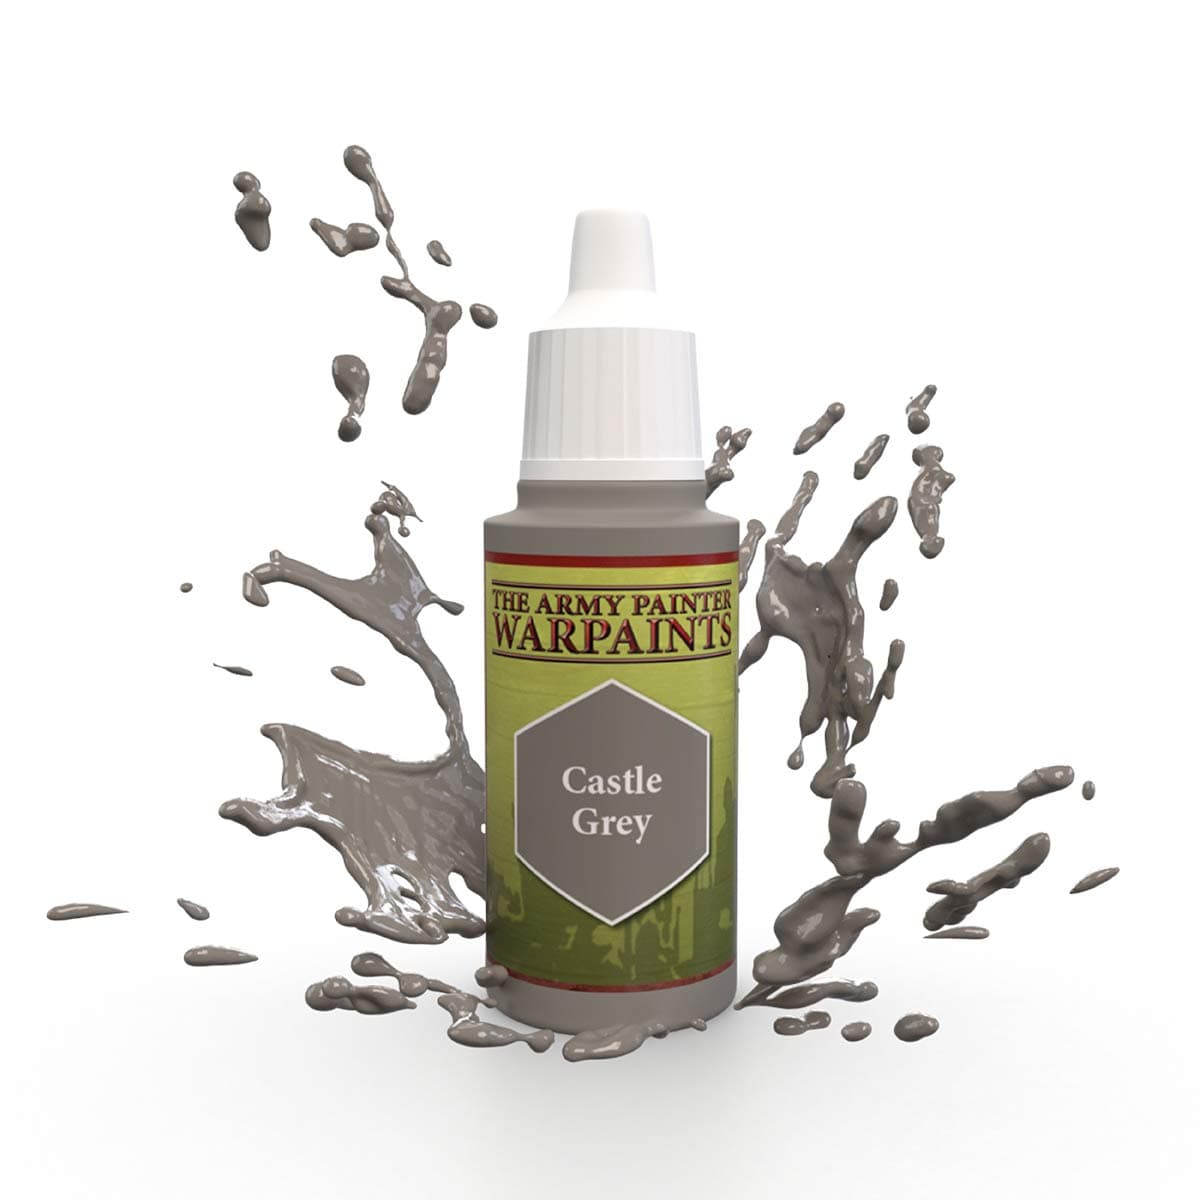 The Army Painter Accessories The Army Painter Warpaints: Castle Grey 18ml